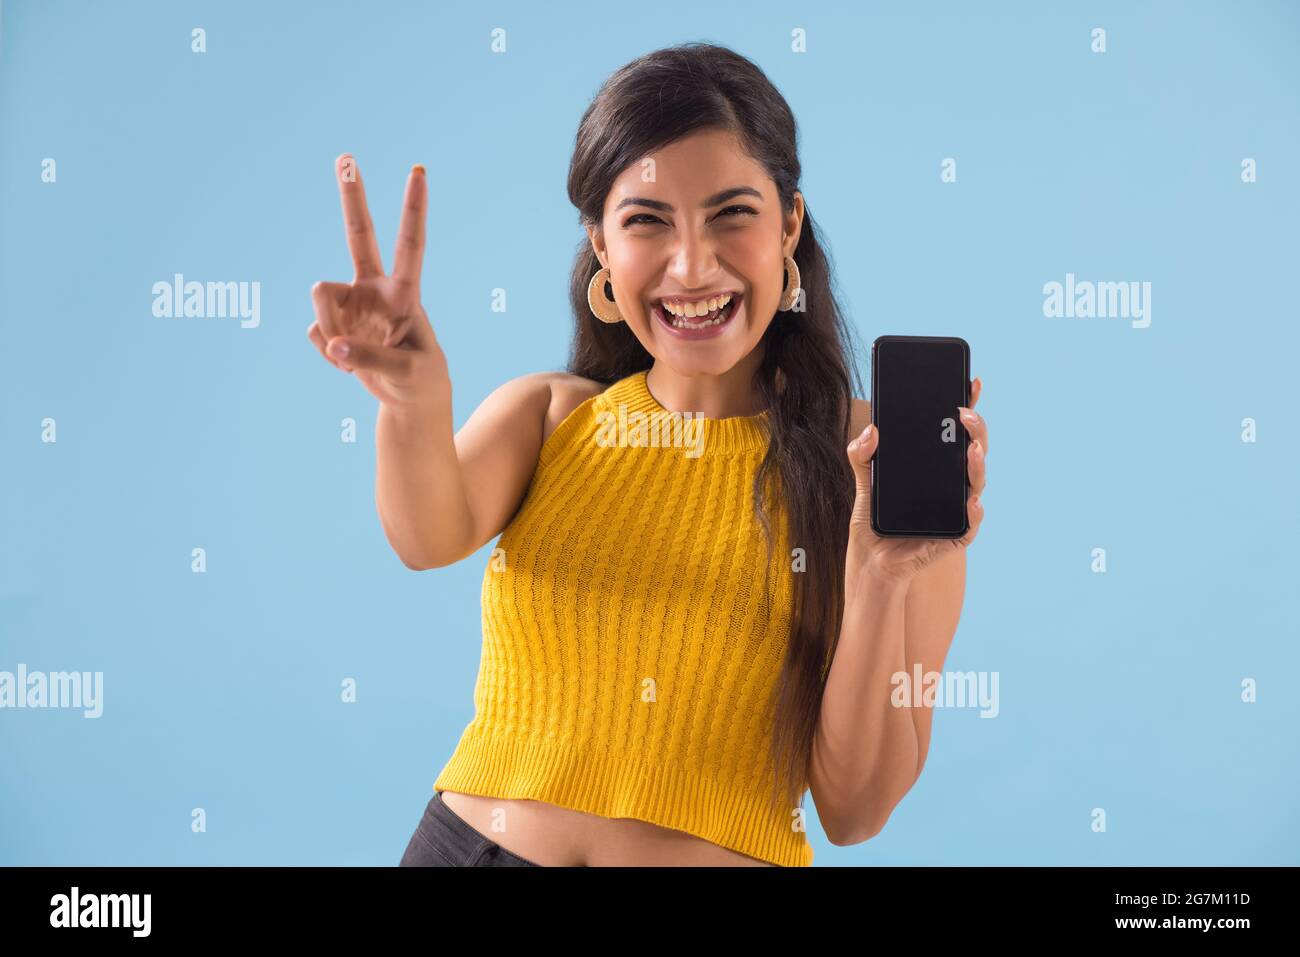 A young woman making the victory sign while showing her mobile. Stock Photo